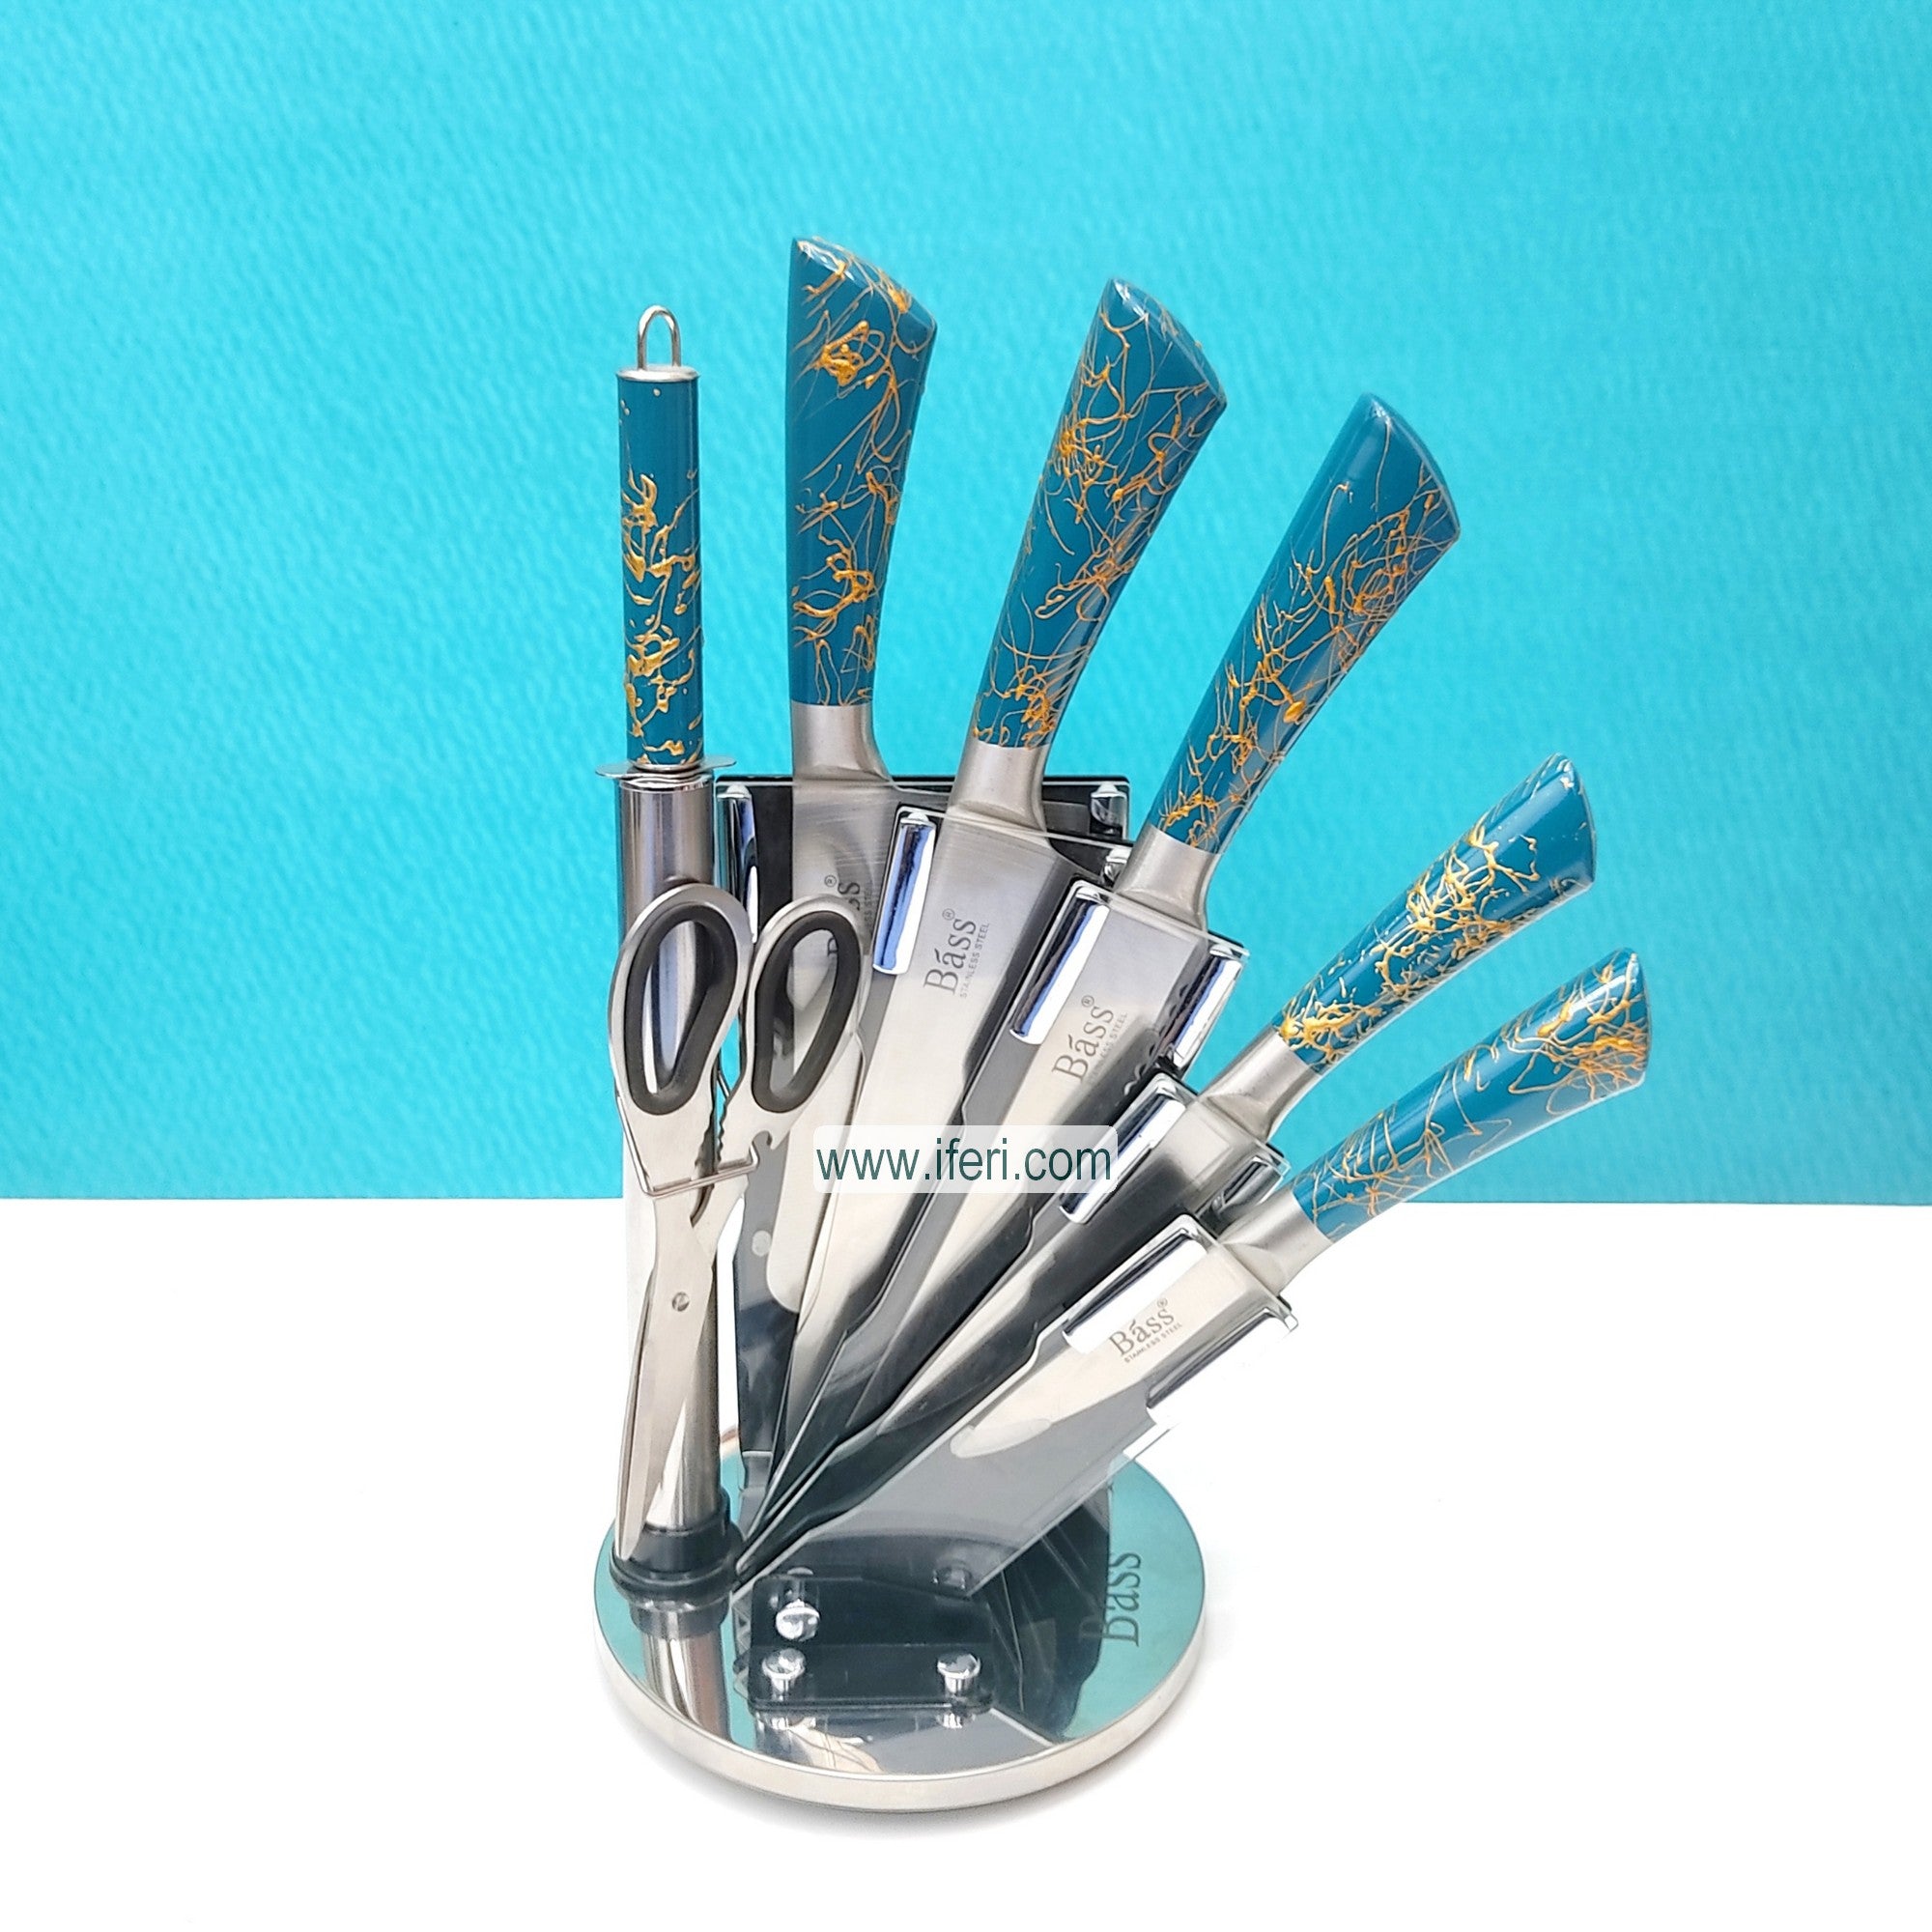 7 pcs Revolving Knife Set with Stand SY6862